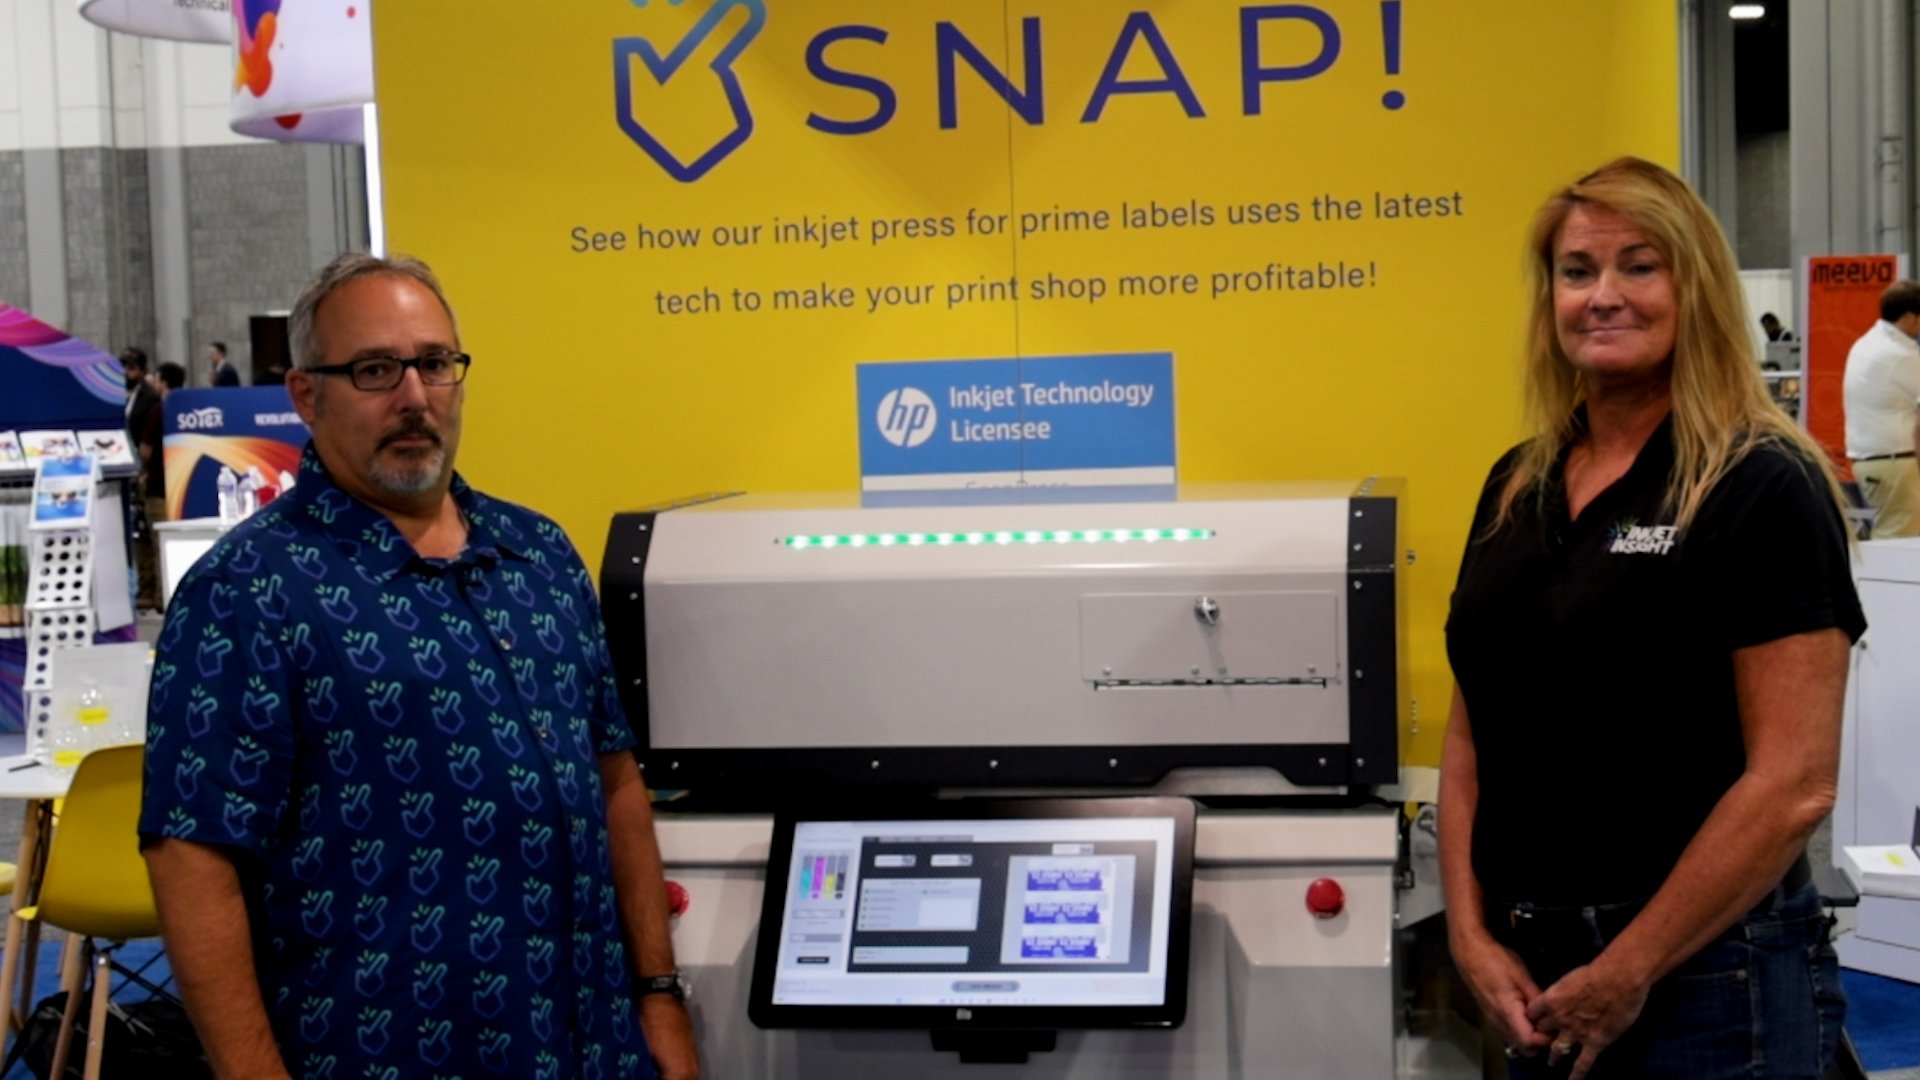 Allen Datagraph Systems Launches the SnapPress Digital Label Printer